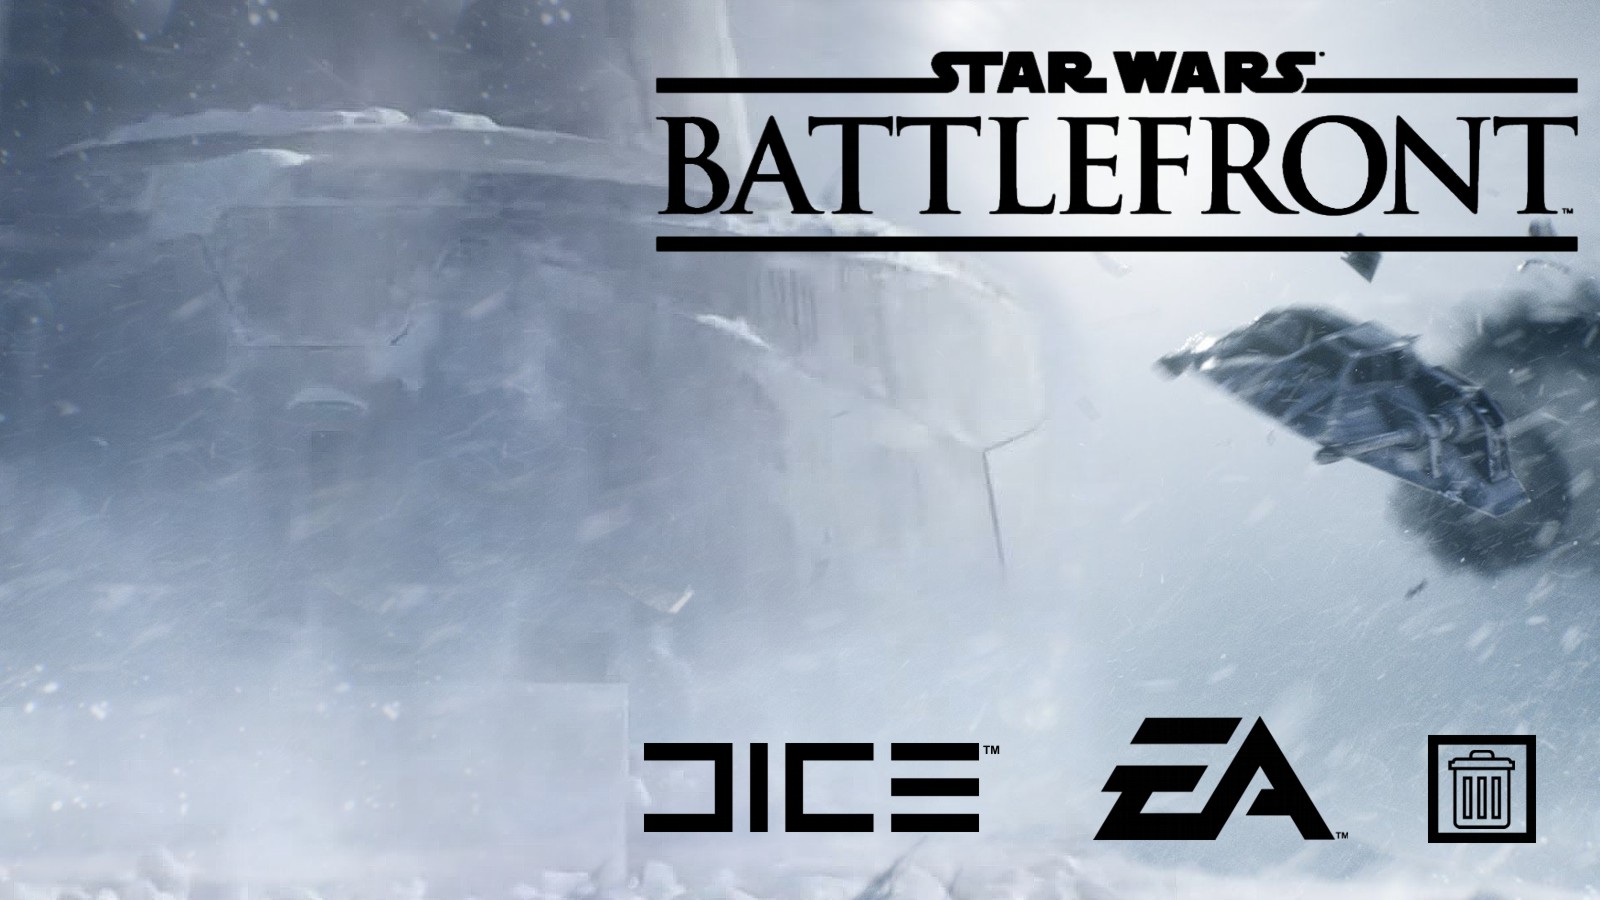 Star Wars Battlefront Dice Hoth Pc Background By Imperial96 On